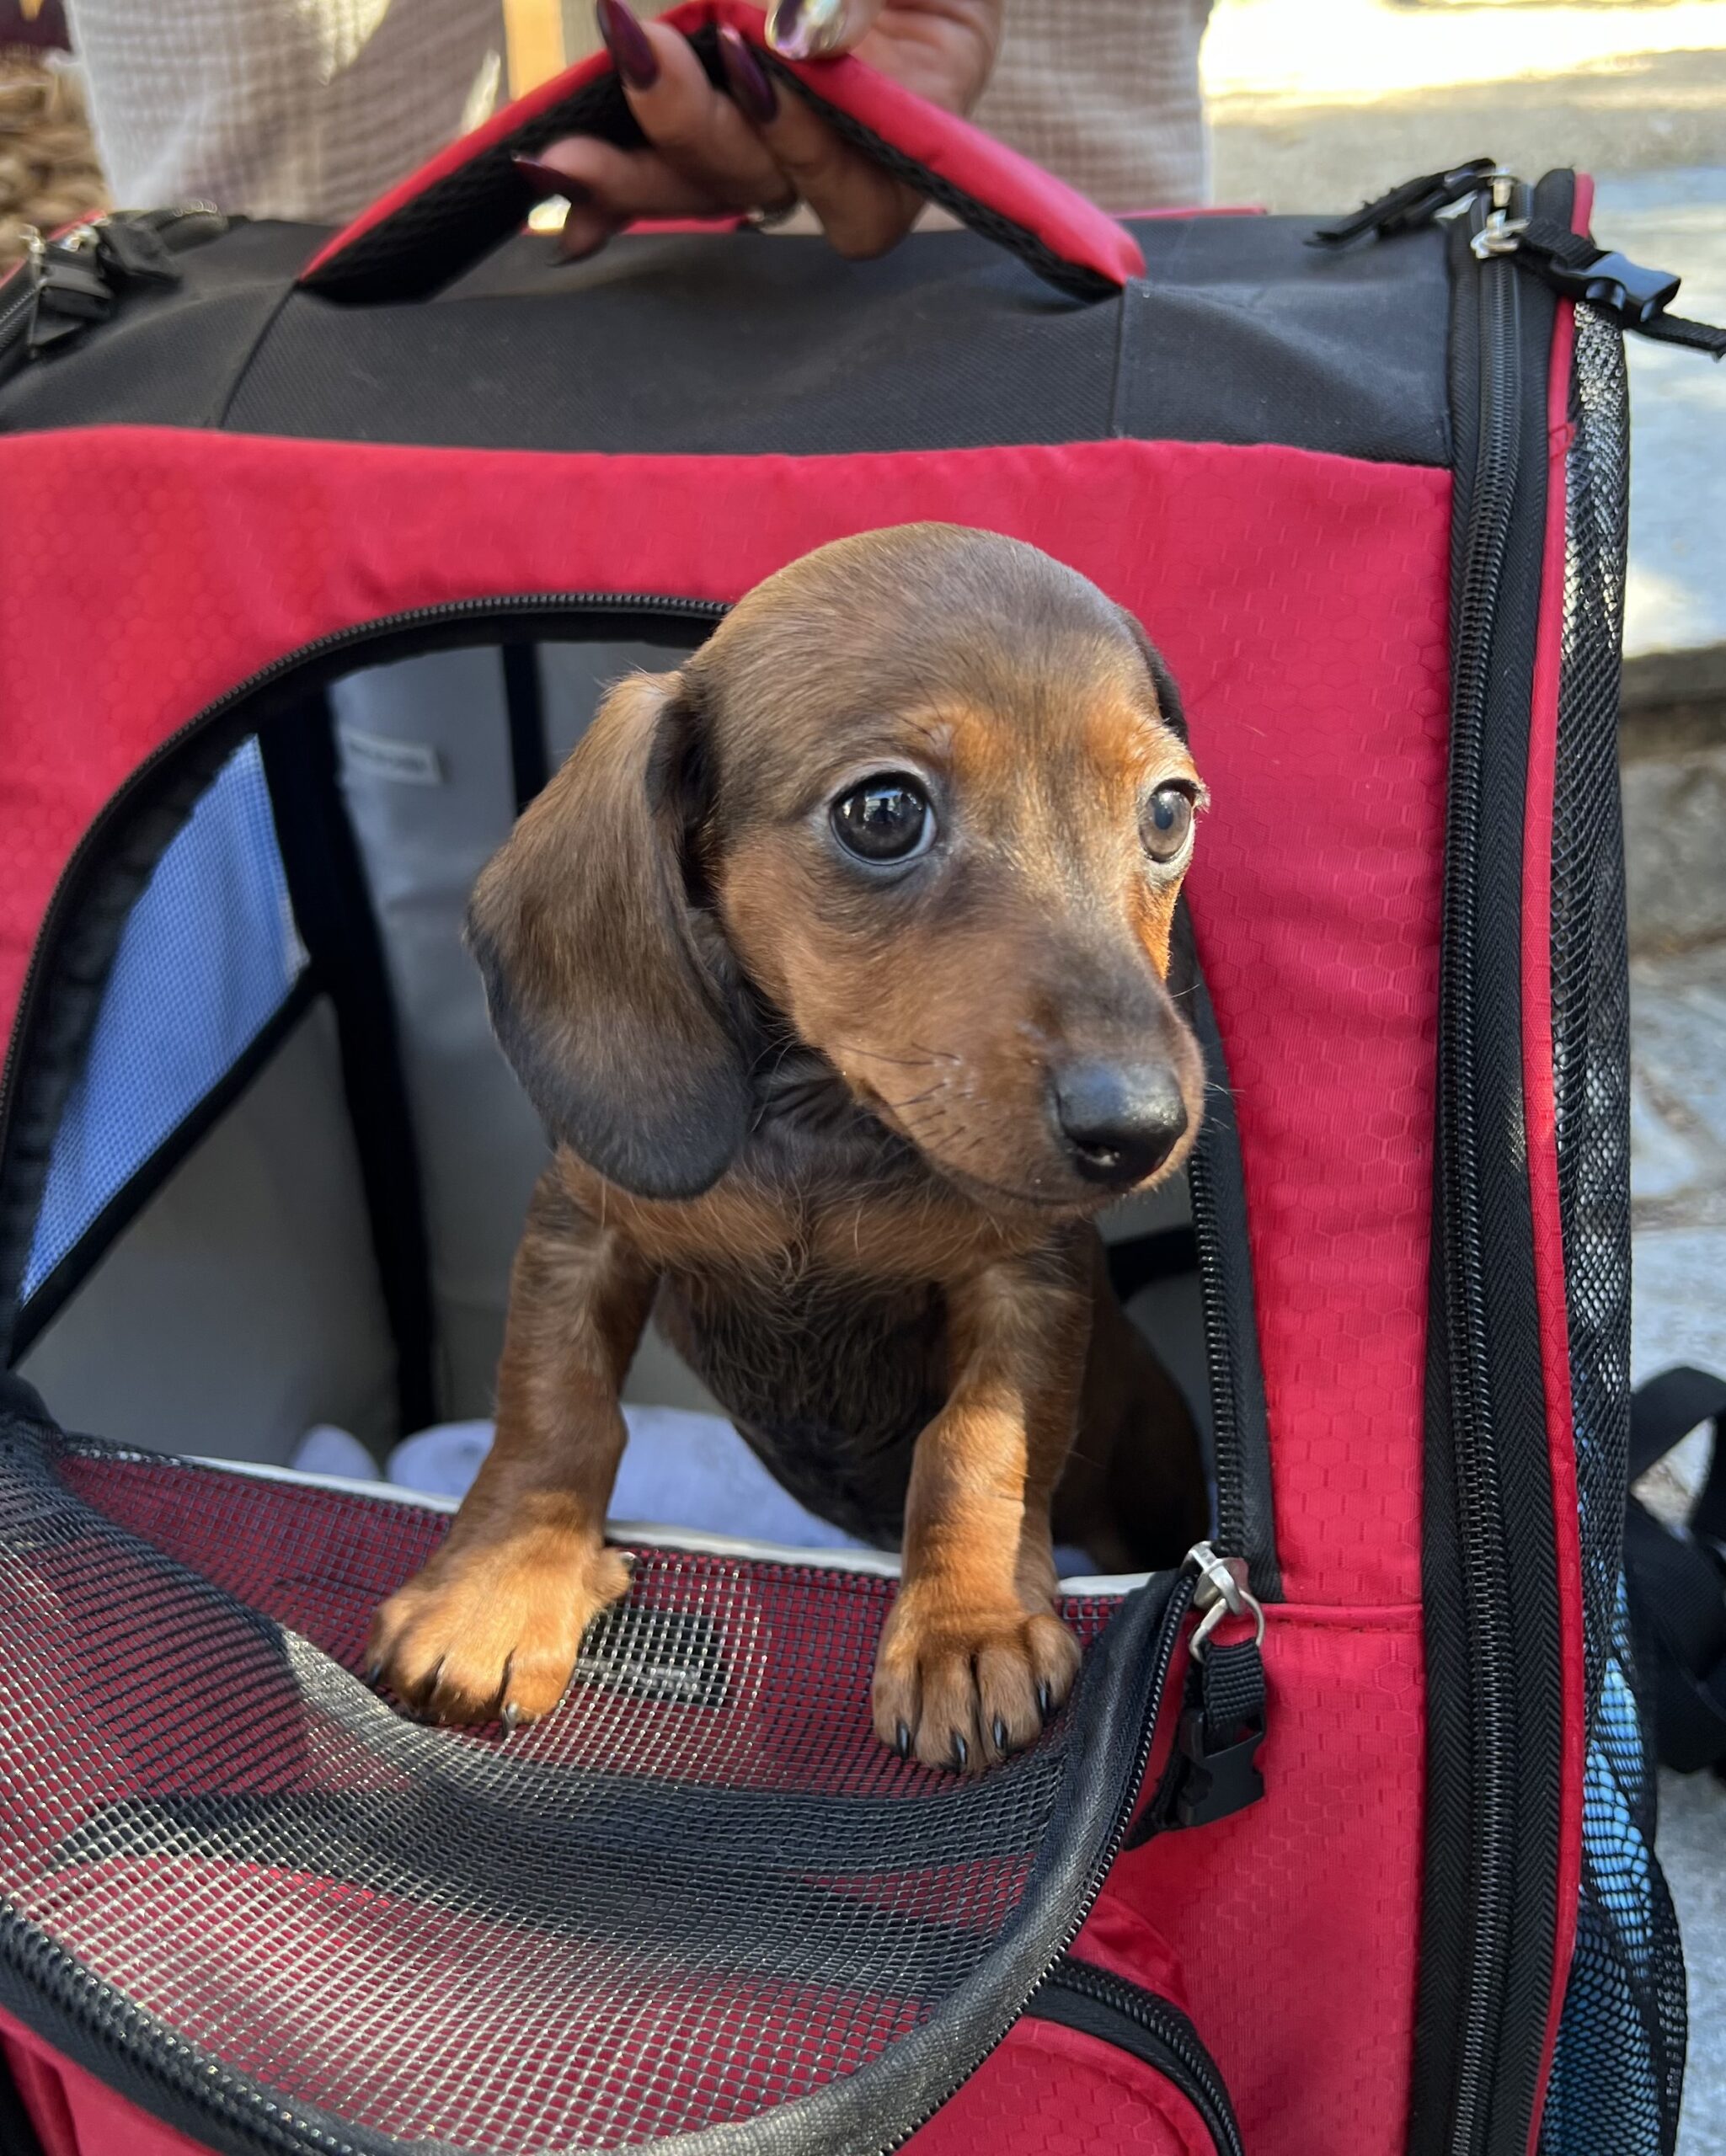 Dachshund Puppy Sticking Her Head Out Of A Dog Carrier Backpack